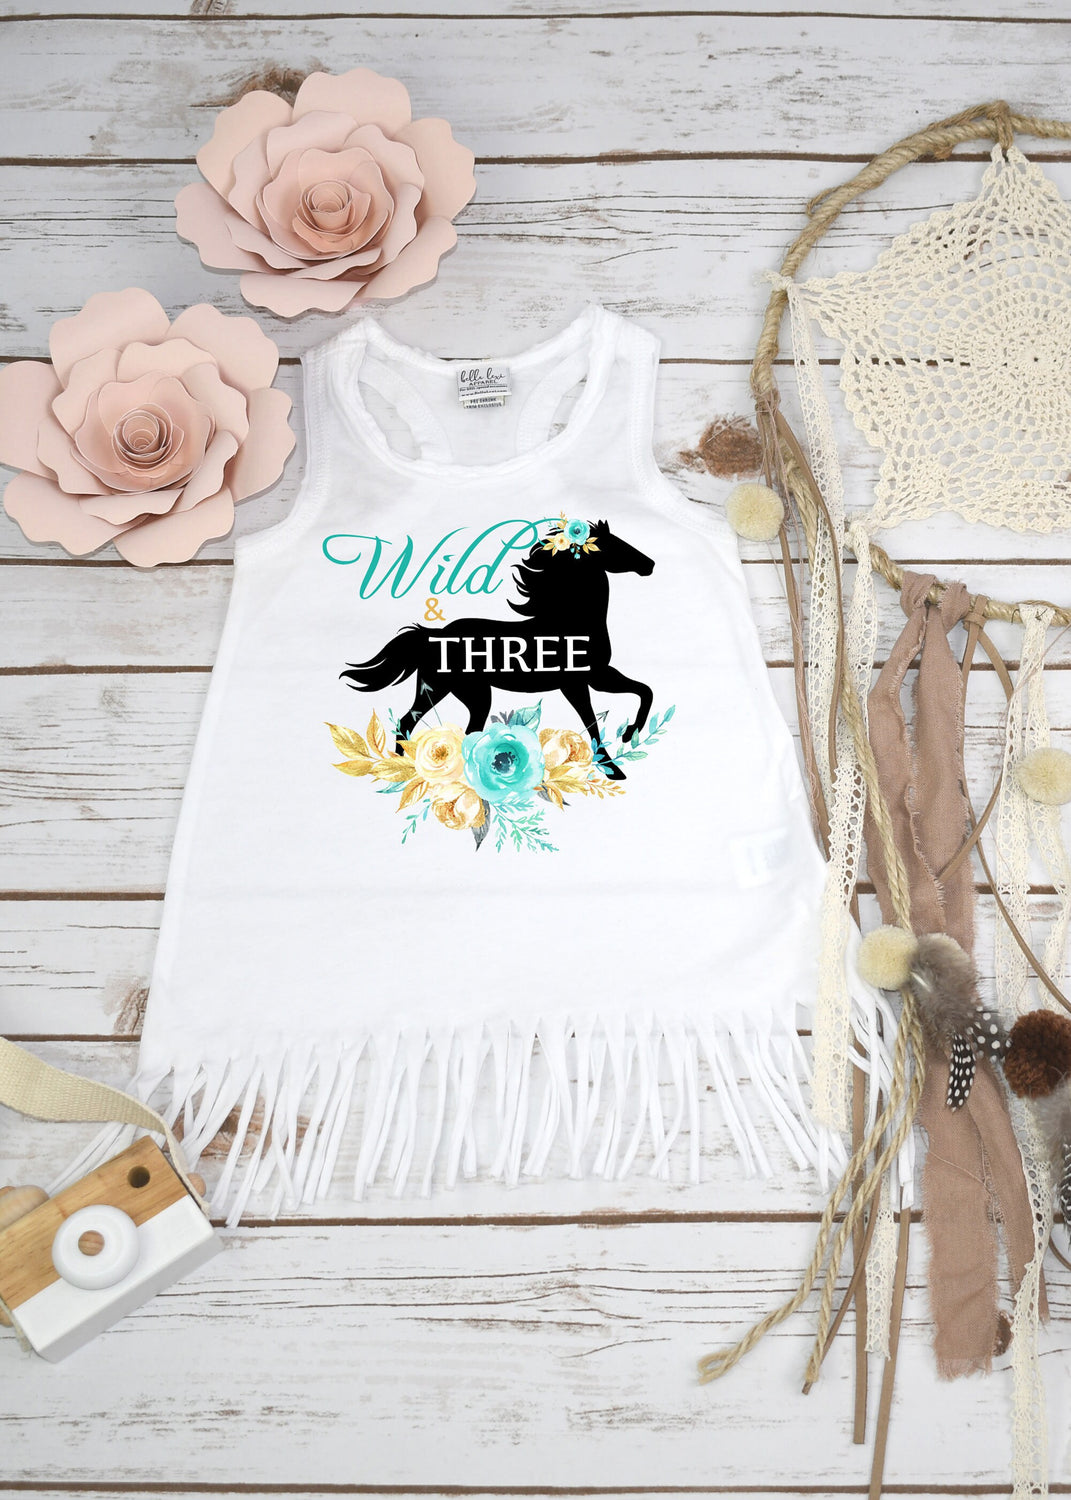 Horse Birthday, Wild and Three, Third Birthday, Horse Party, Niece Gift, Cute Girl Clothes, Cute Girl Gifts, Pony Party, 3rd Birthday, Horse